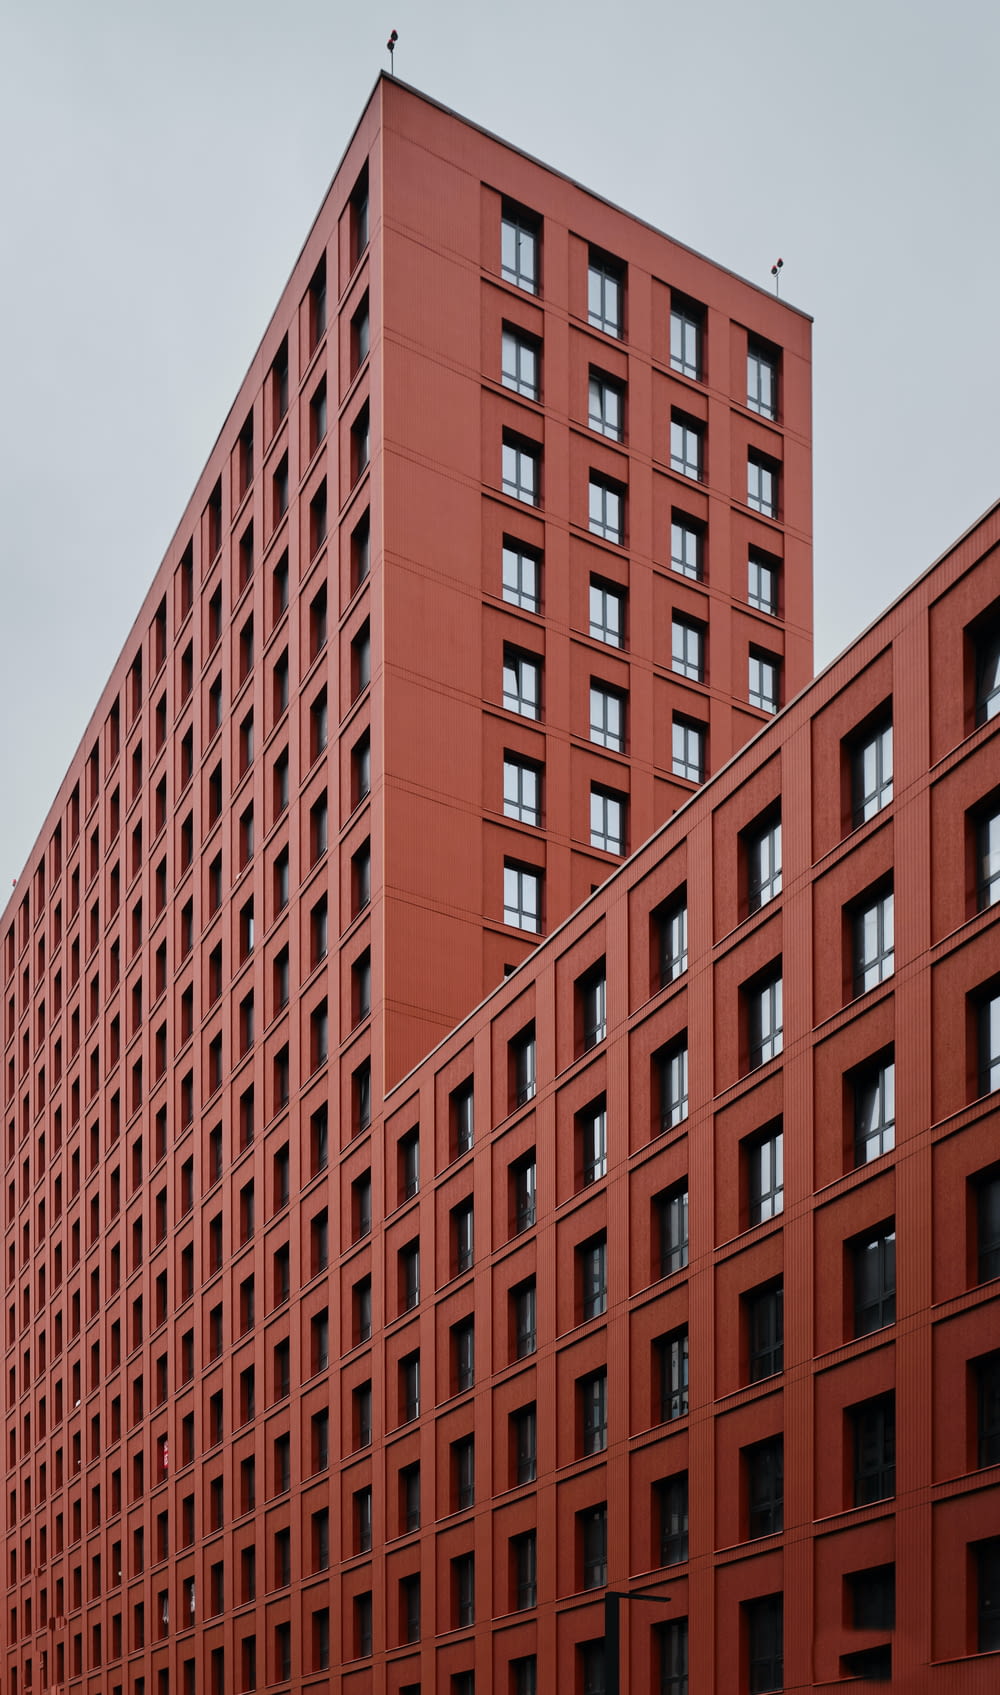 a large red building with many windows on it